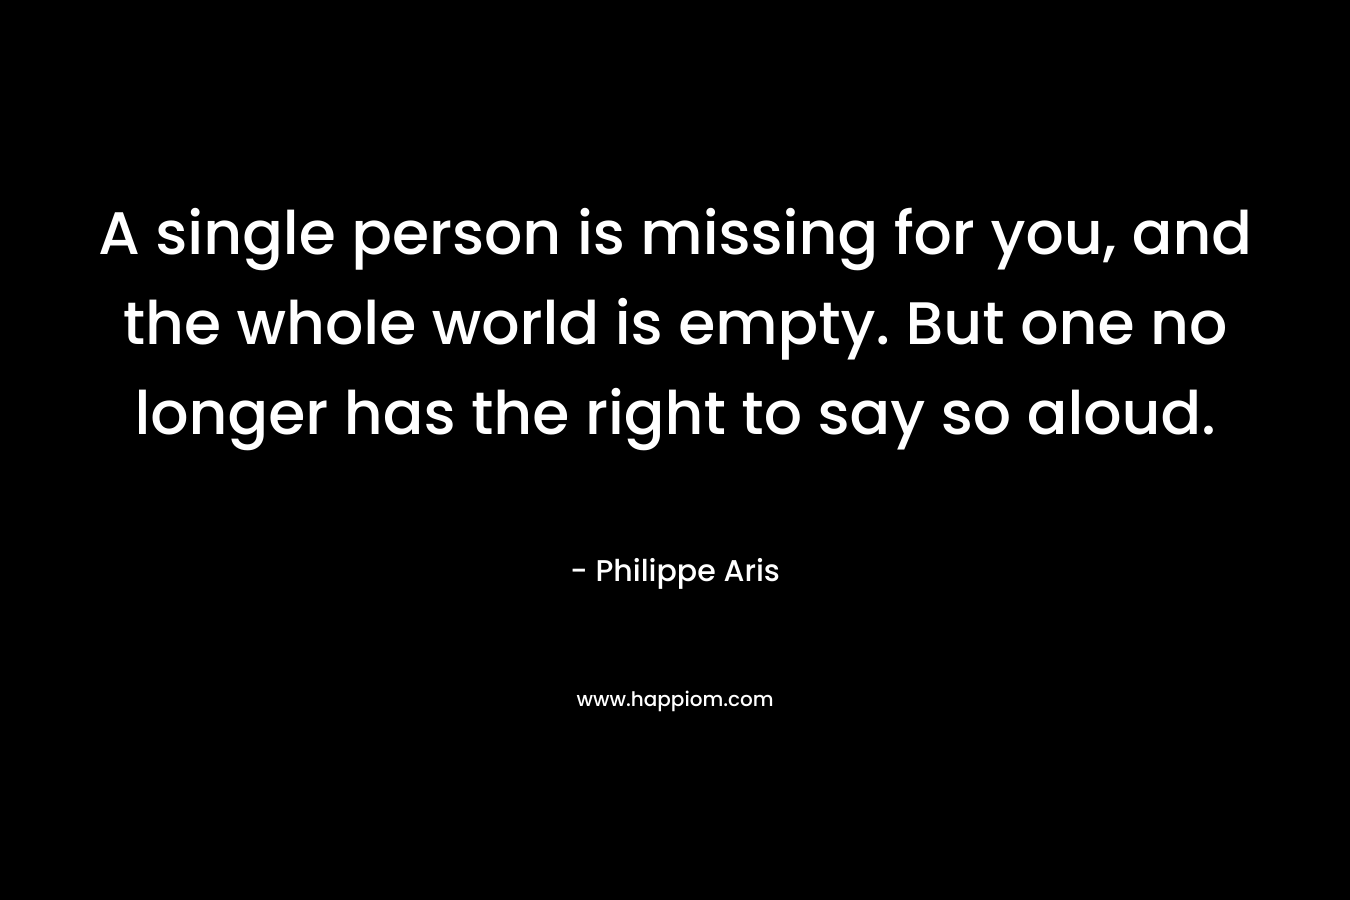 A single person is missing for you, and the whole world is empty. But one no longer has the right to say so aloud. – Philippe Aris